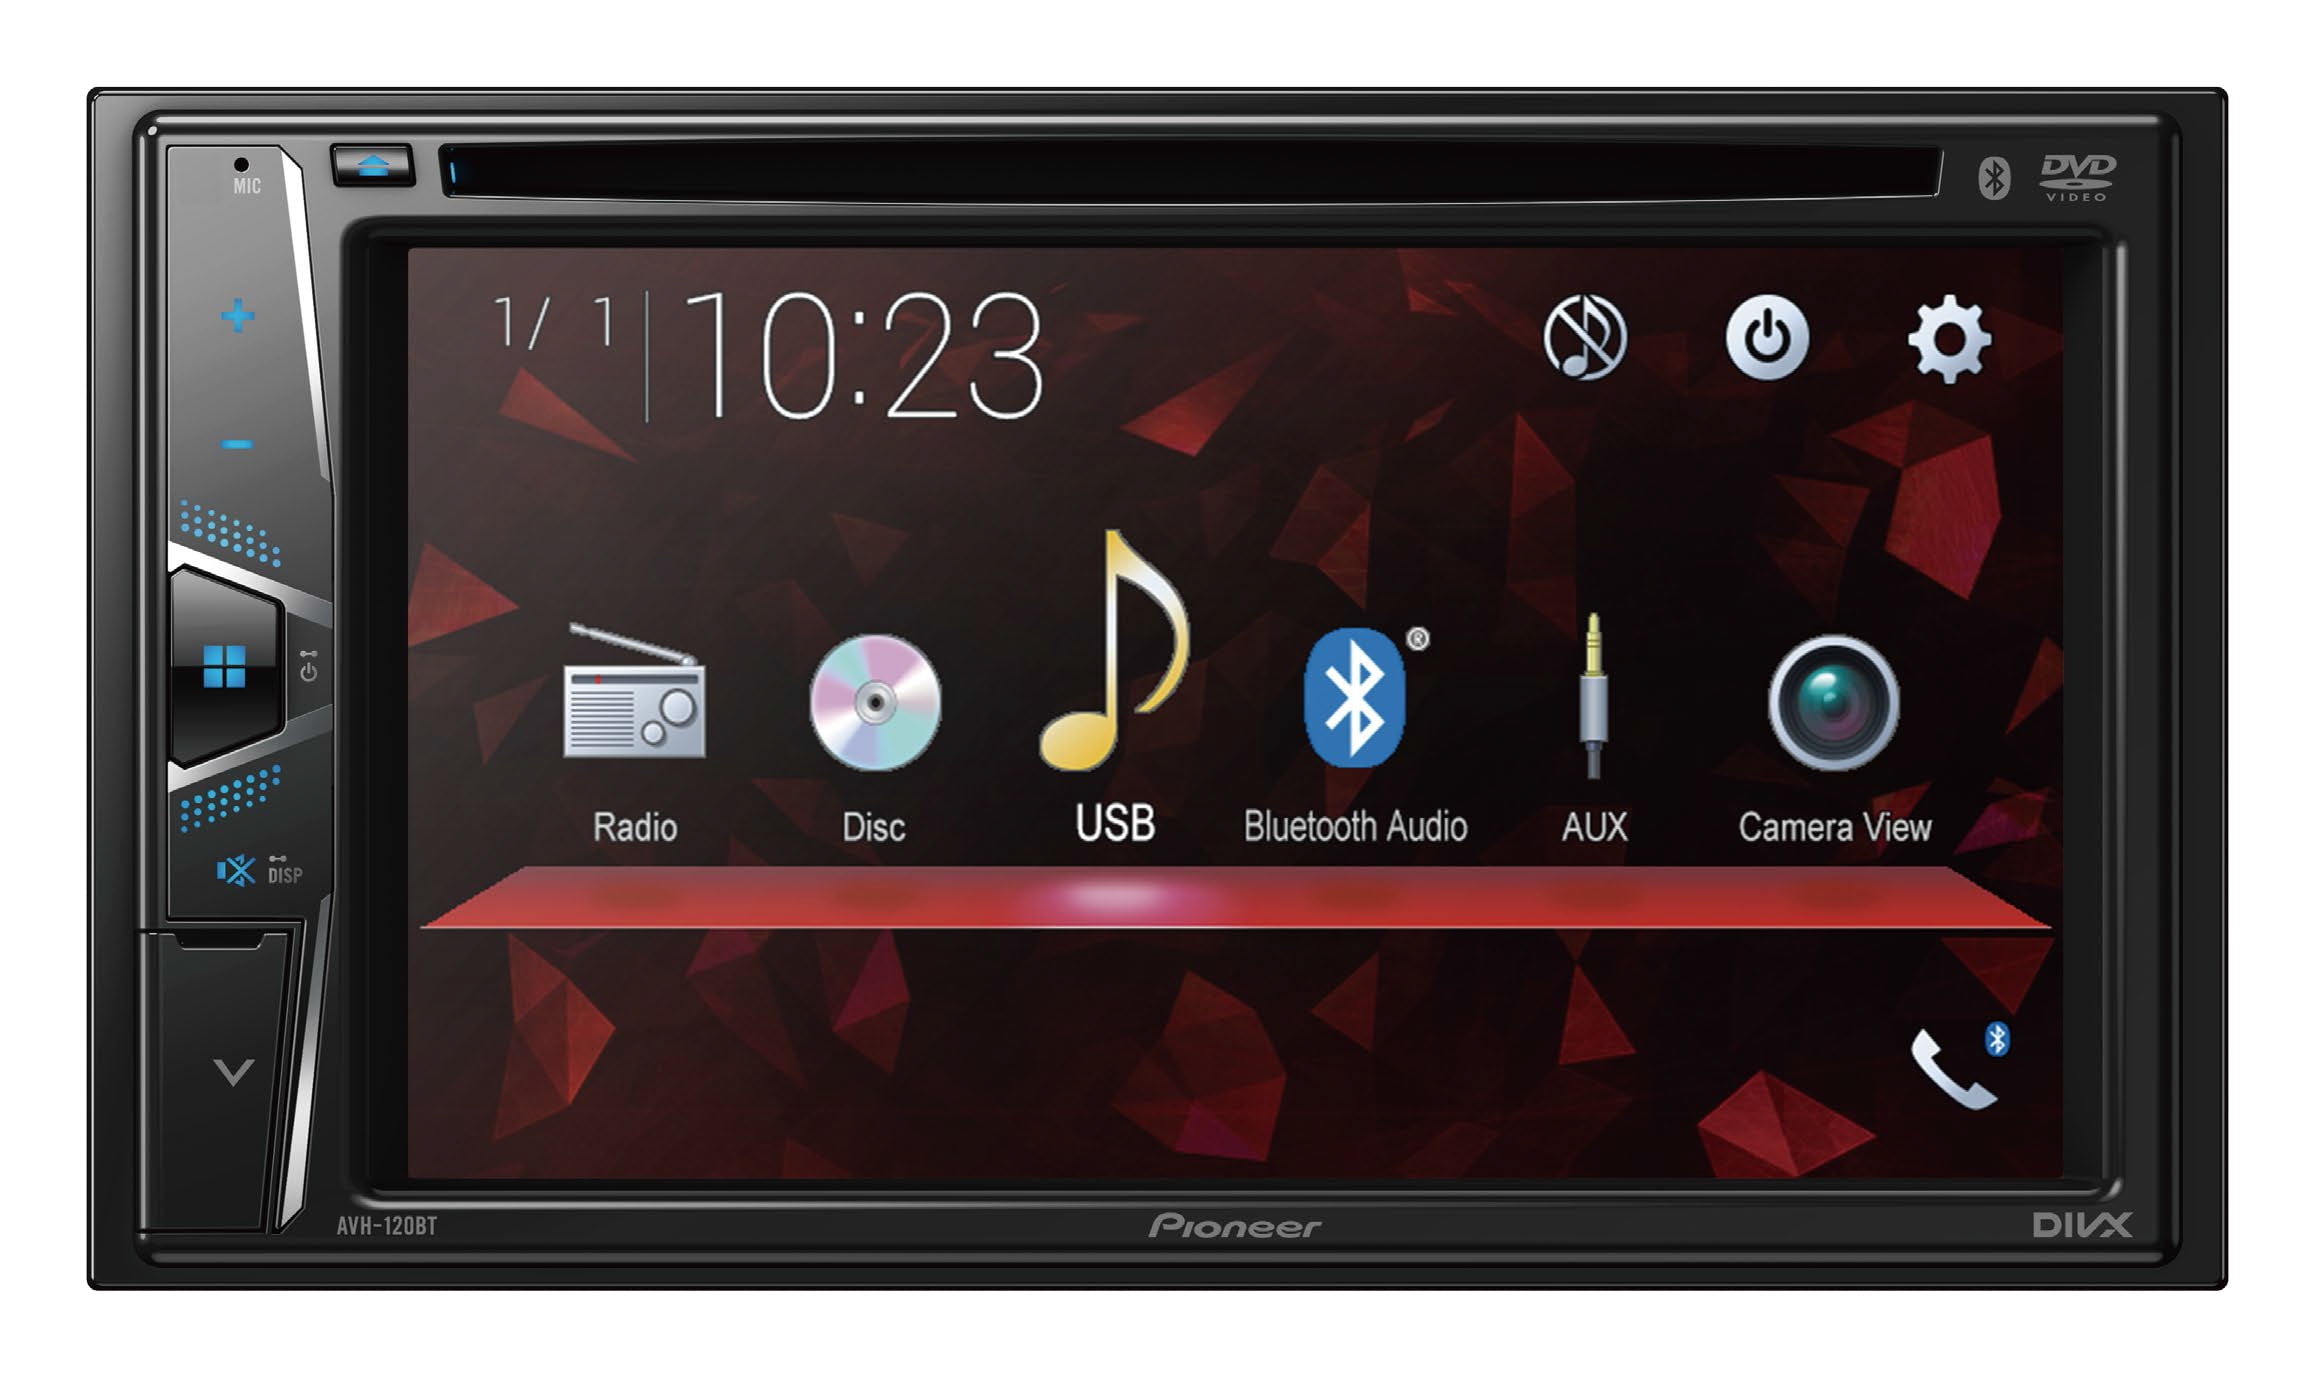 Pioneer Avh 120bt Multimedia Dvd Receiver With 6 2 Inch Wvga Touchscreen Display And Built In Bluetooth C For Hands Free Calling Audio Playback Double Din Walmart Com